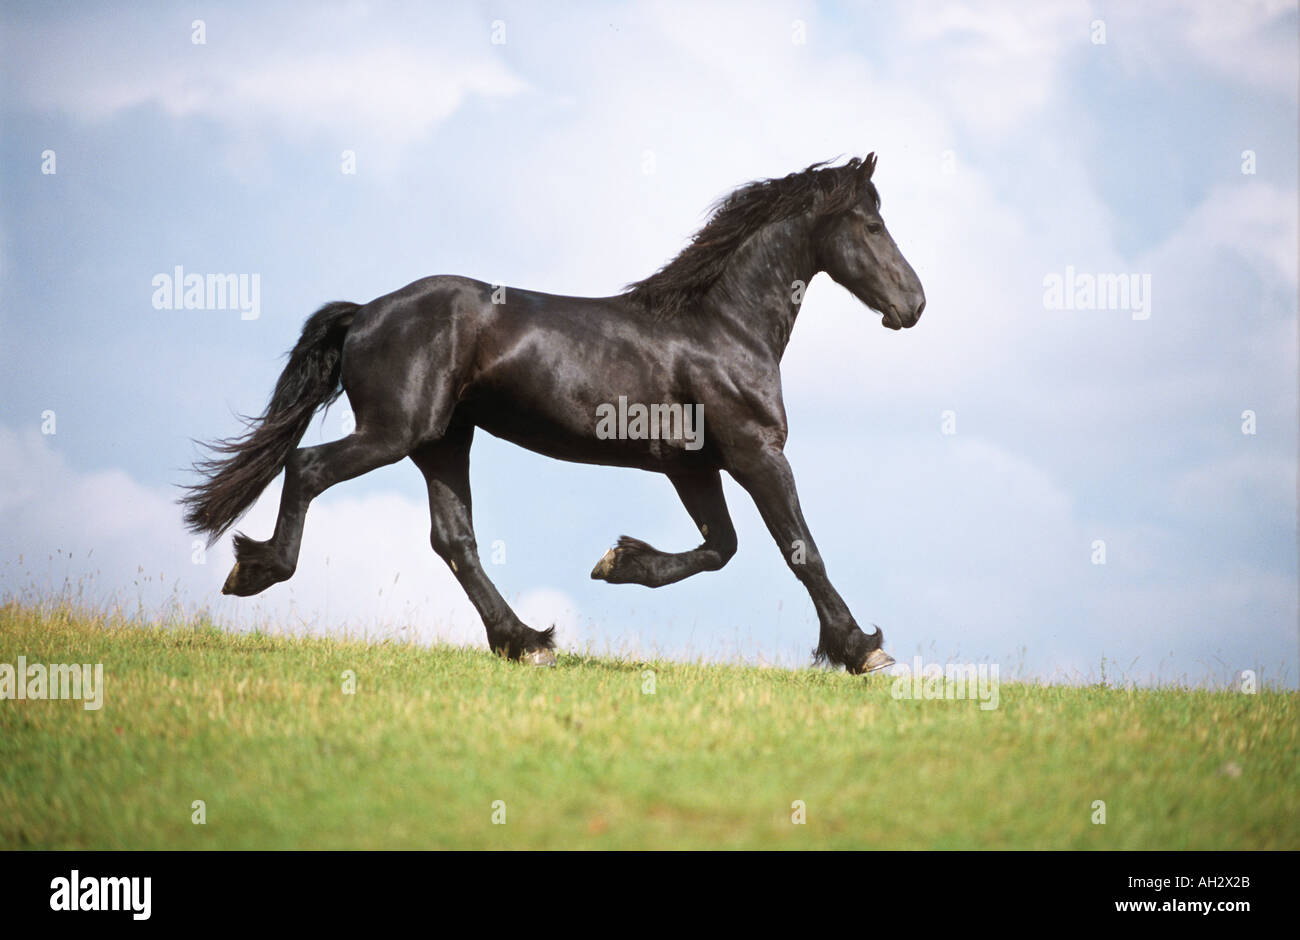 Cheval frison - trotting on meadow Banque D'Images